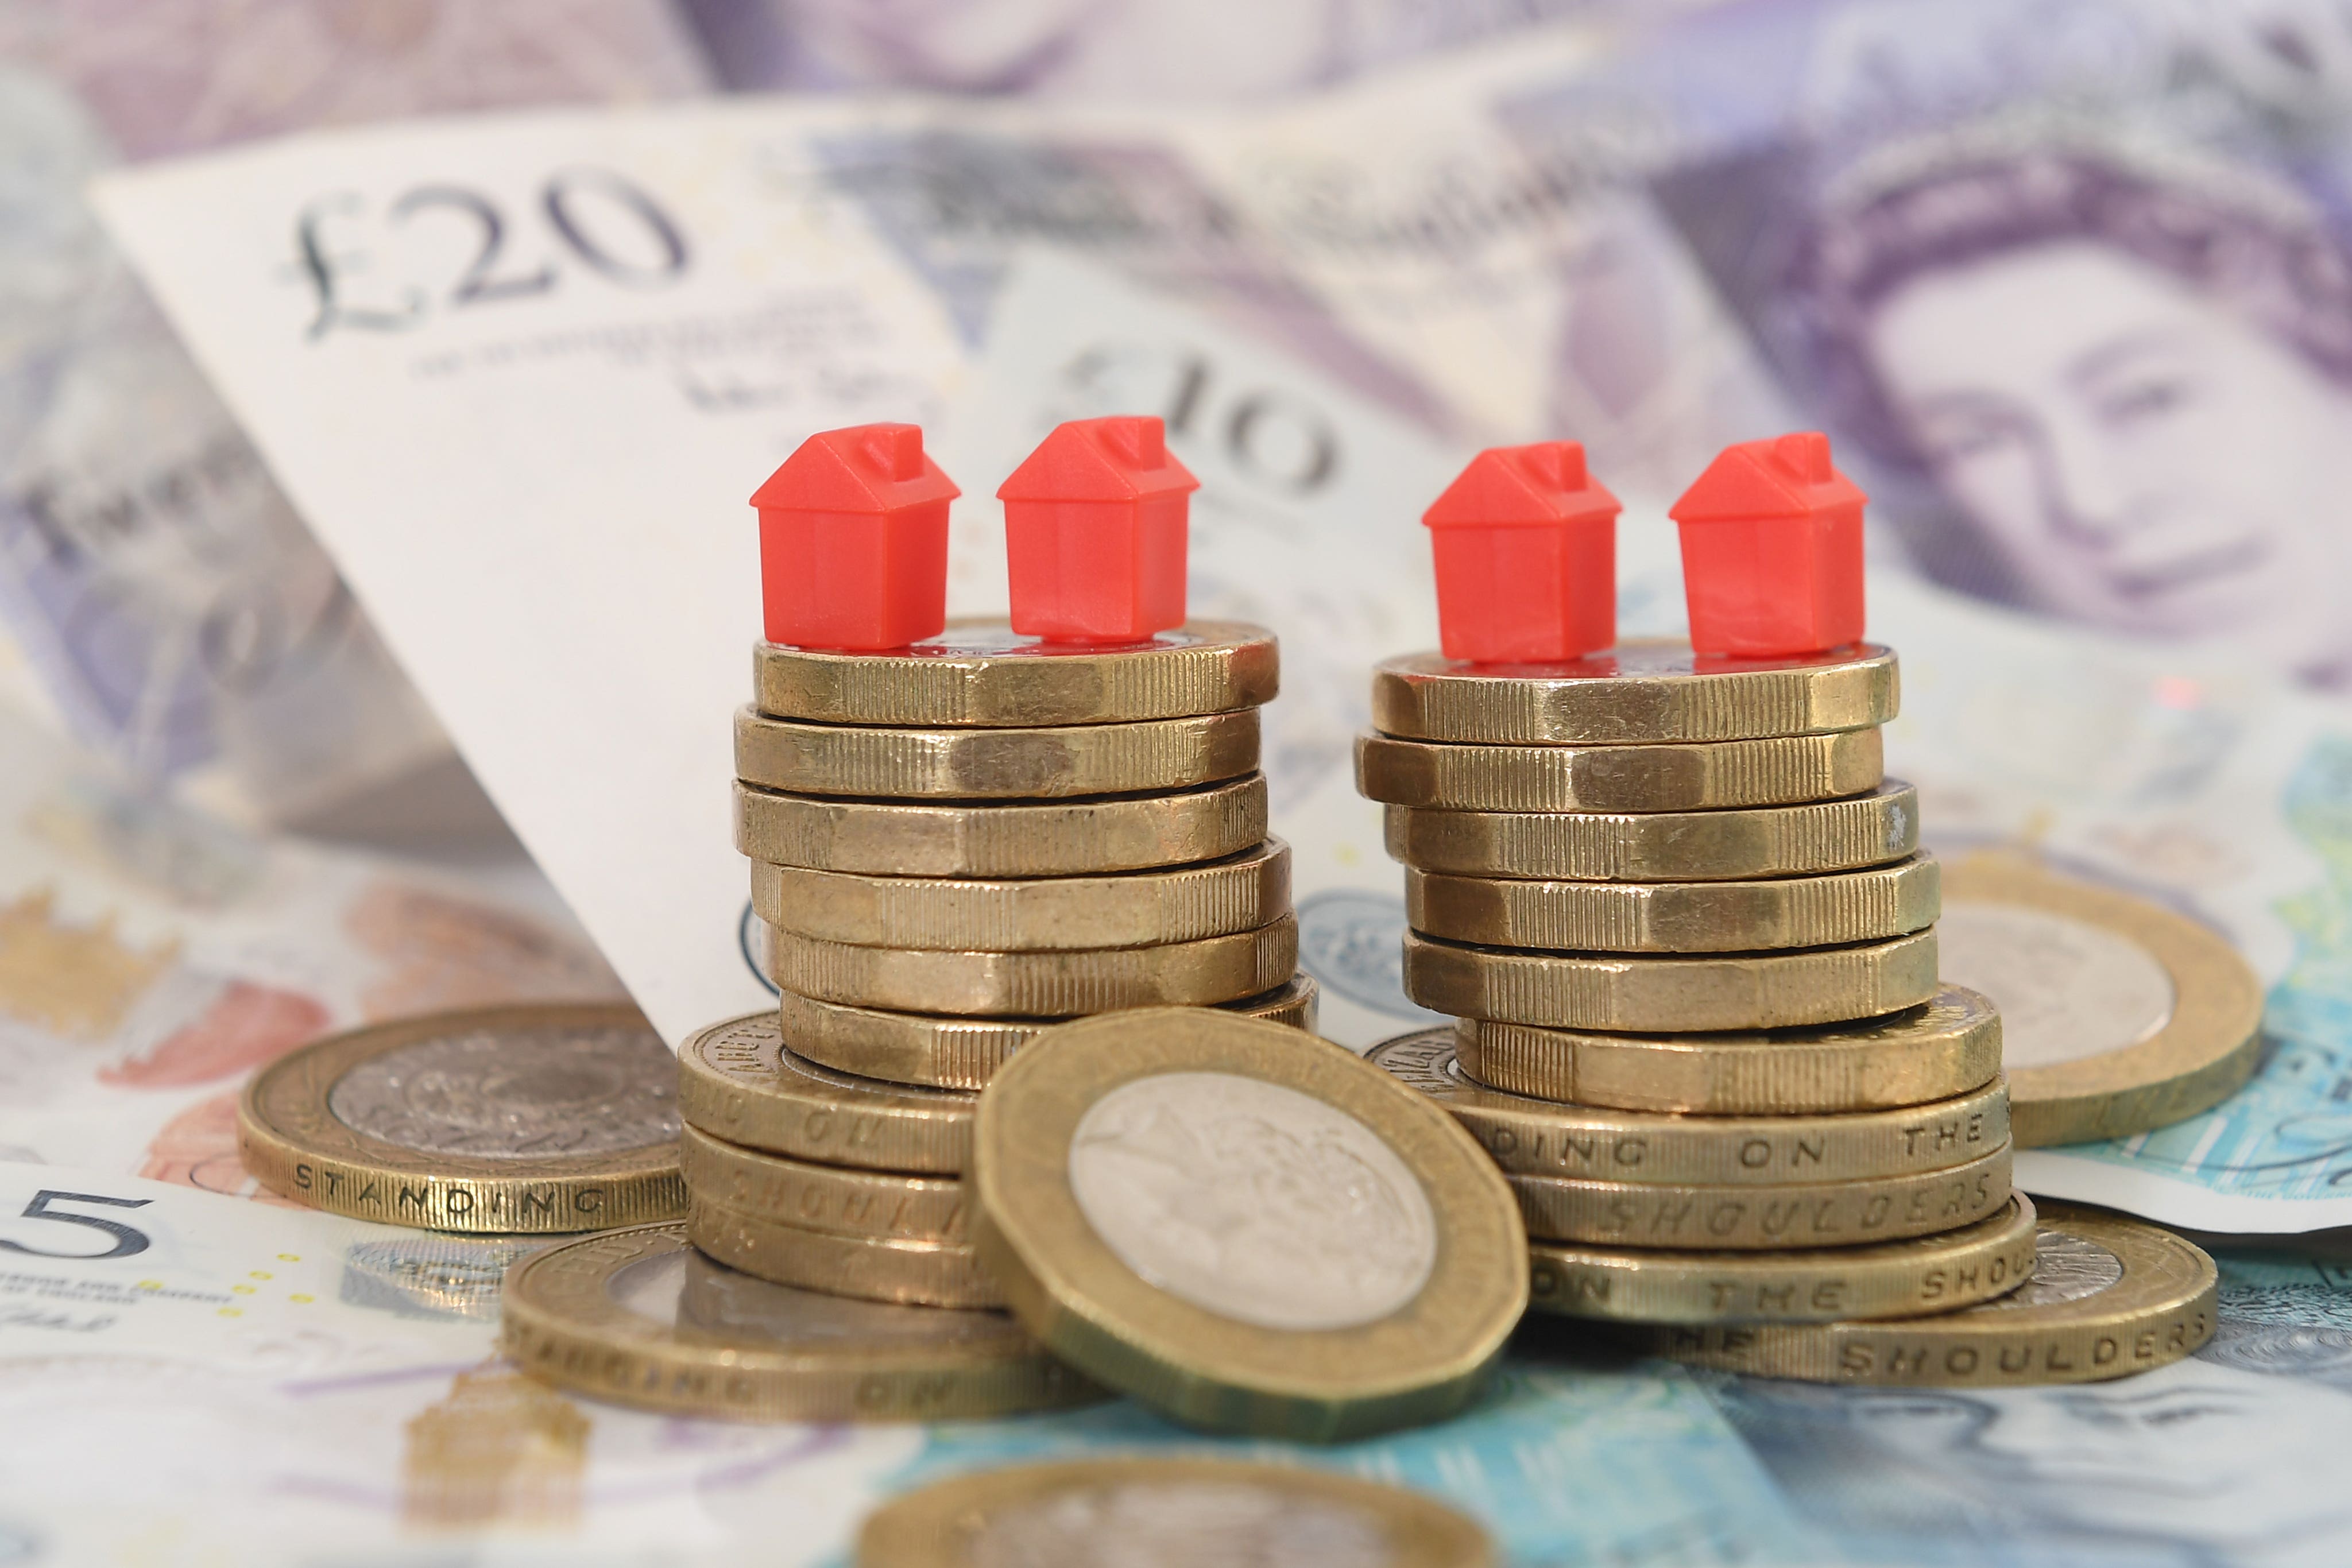 Default rates on mortgages and credit cards increased in the run-up to Christmas